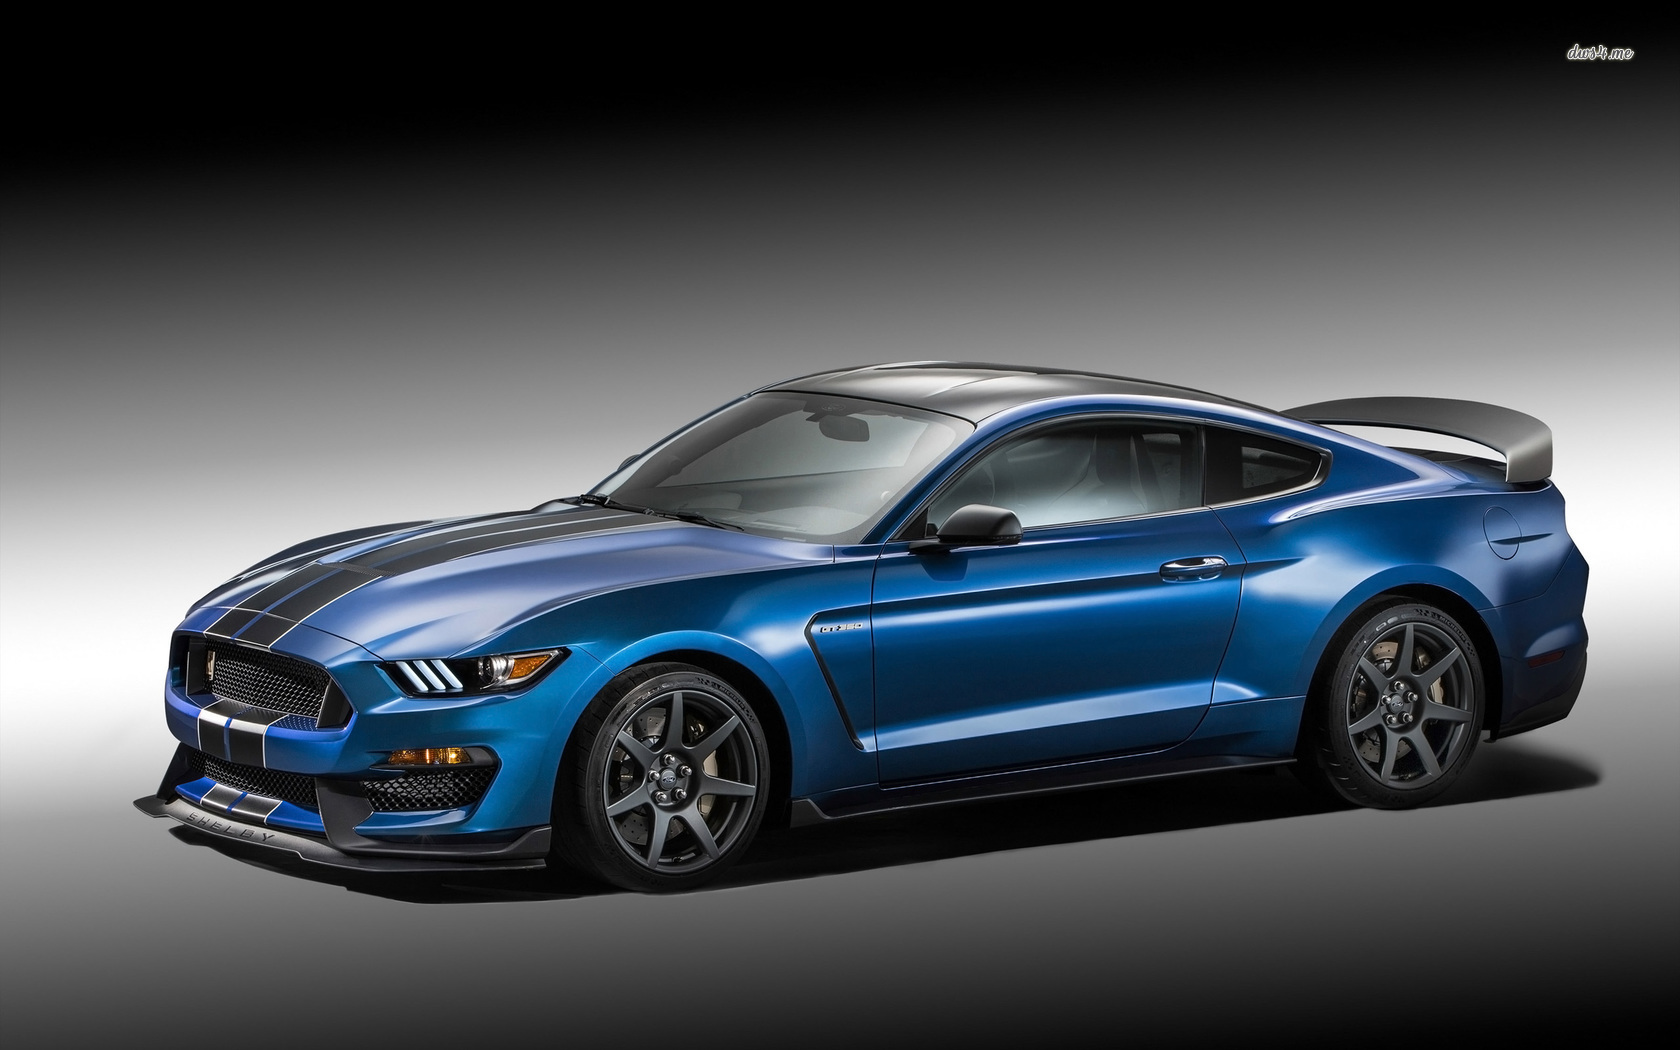 Ford Mustang Shelby Gt350 Wallpaper Car